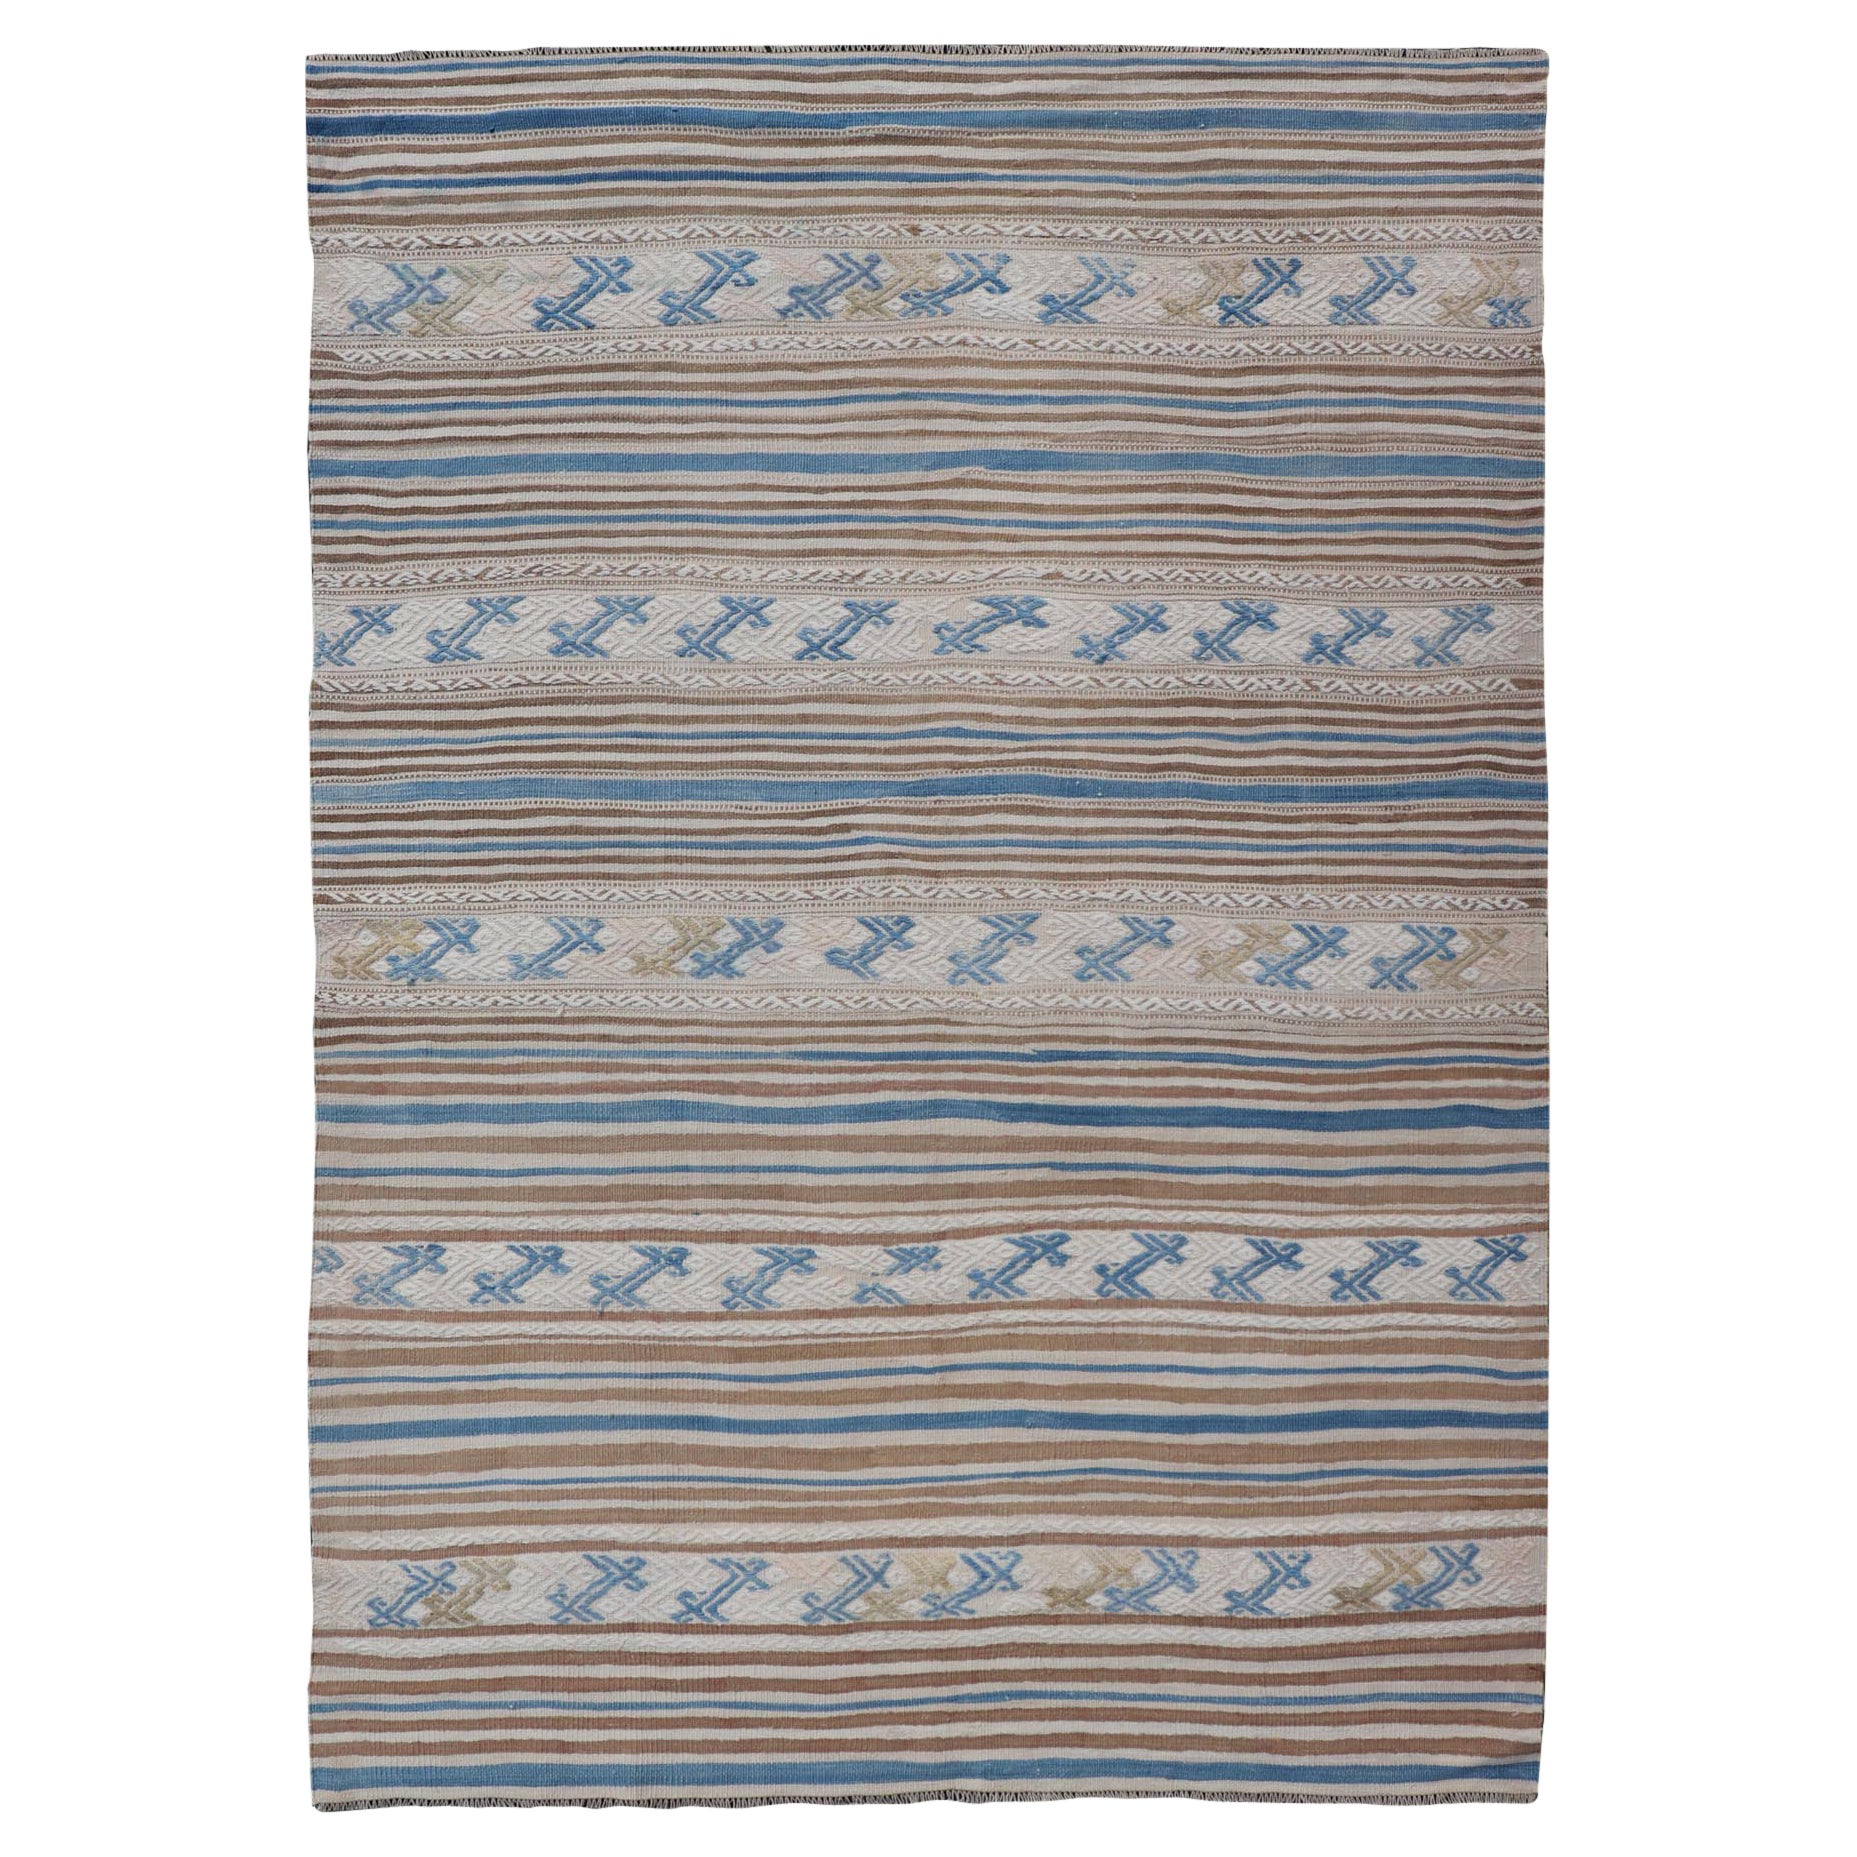 Turkish Hand Woven Flat-Weave Embroideries Kilim in Taupe, Brown, and Blue 